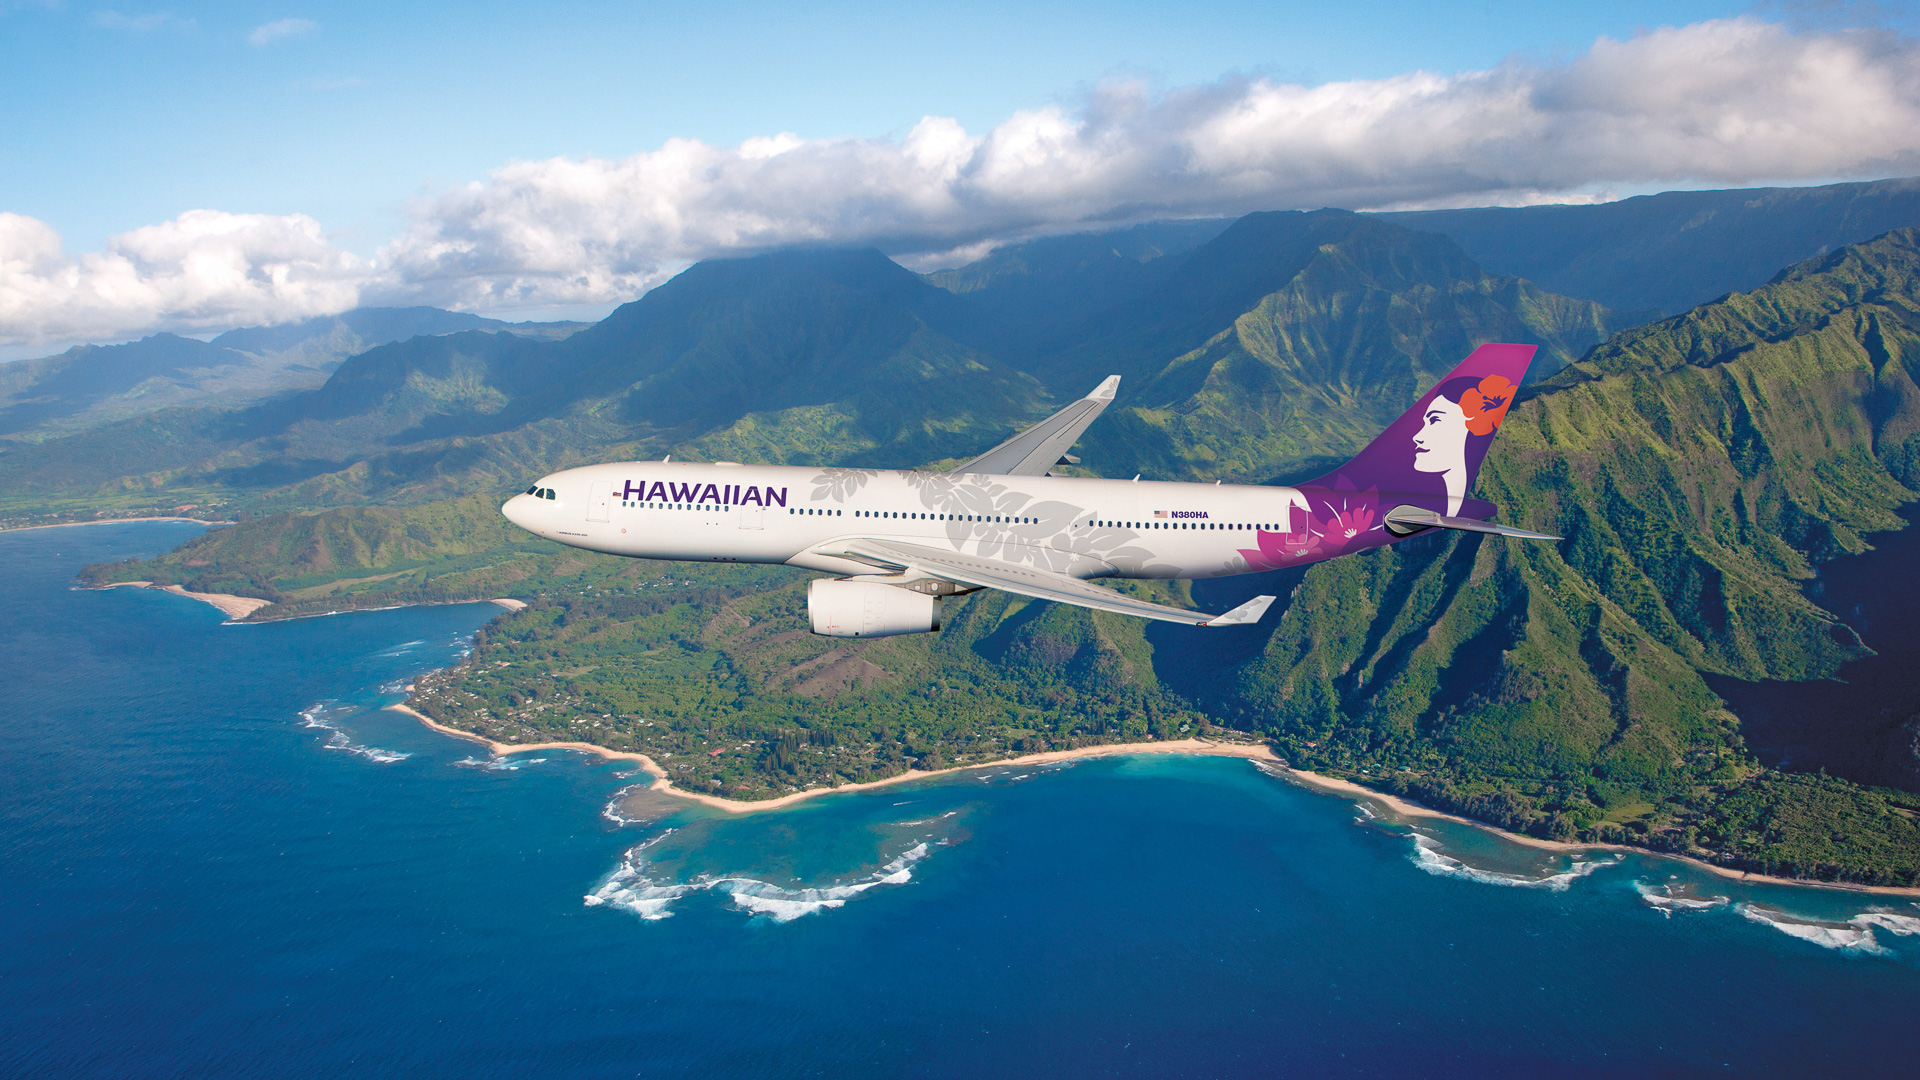 <p>Fly Hawaiian and join the HawaiianMiles rewards program and you can earn points on every flight you take. The points never expire, and there are no blackout dates. When you sign up for the Hawaiian Airlines MasterCard, you get 70,000 bonus HawaiianMiles, plus two free checked bags and a one-time 50% off companion discount. The card does have a $99 annual fee.</p>